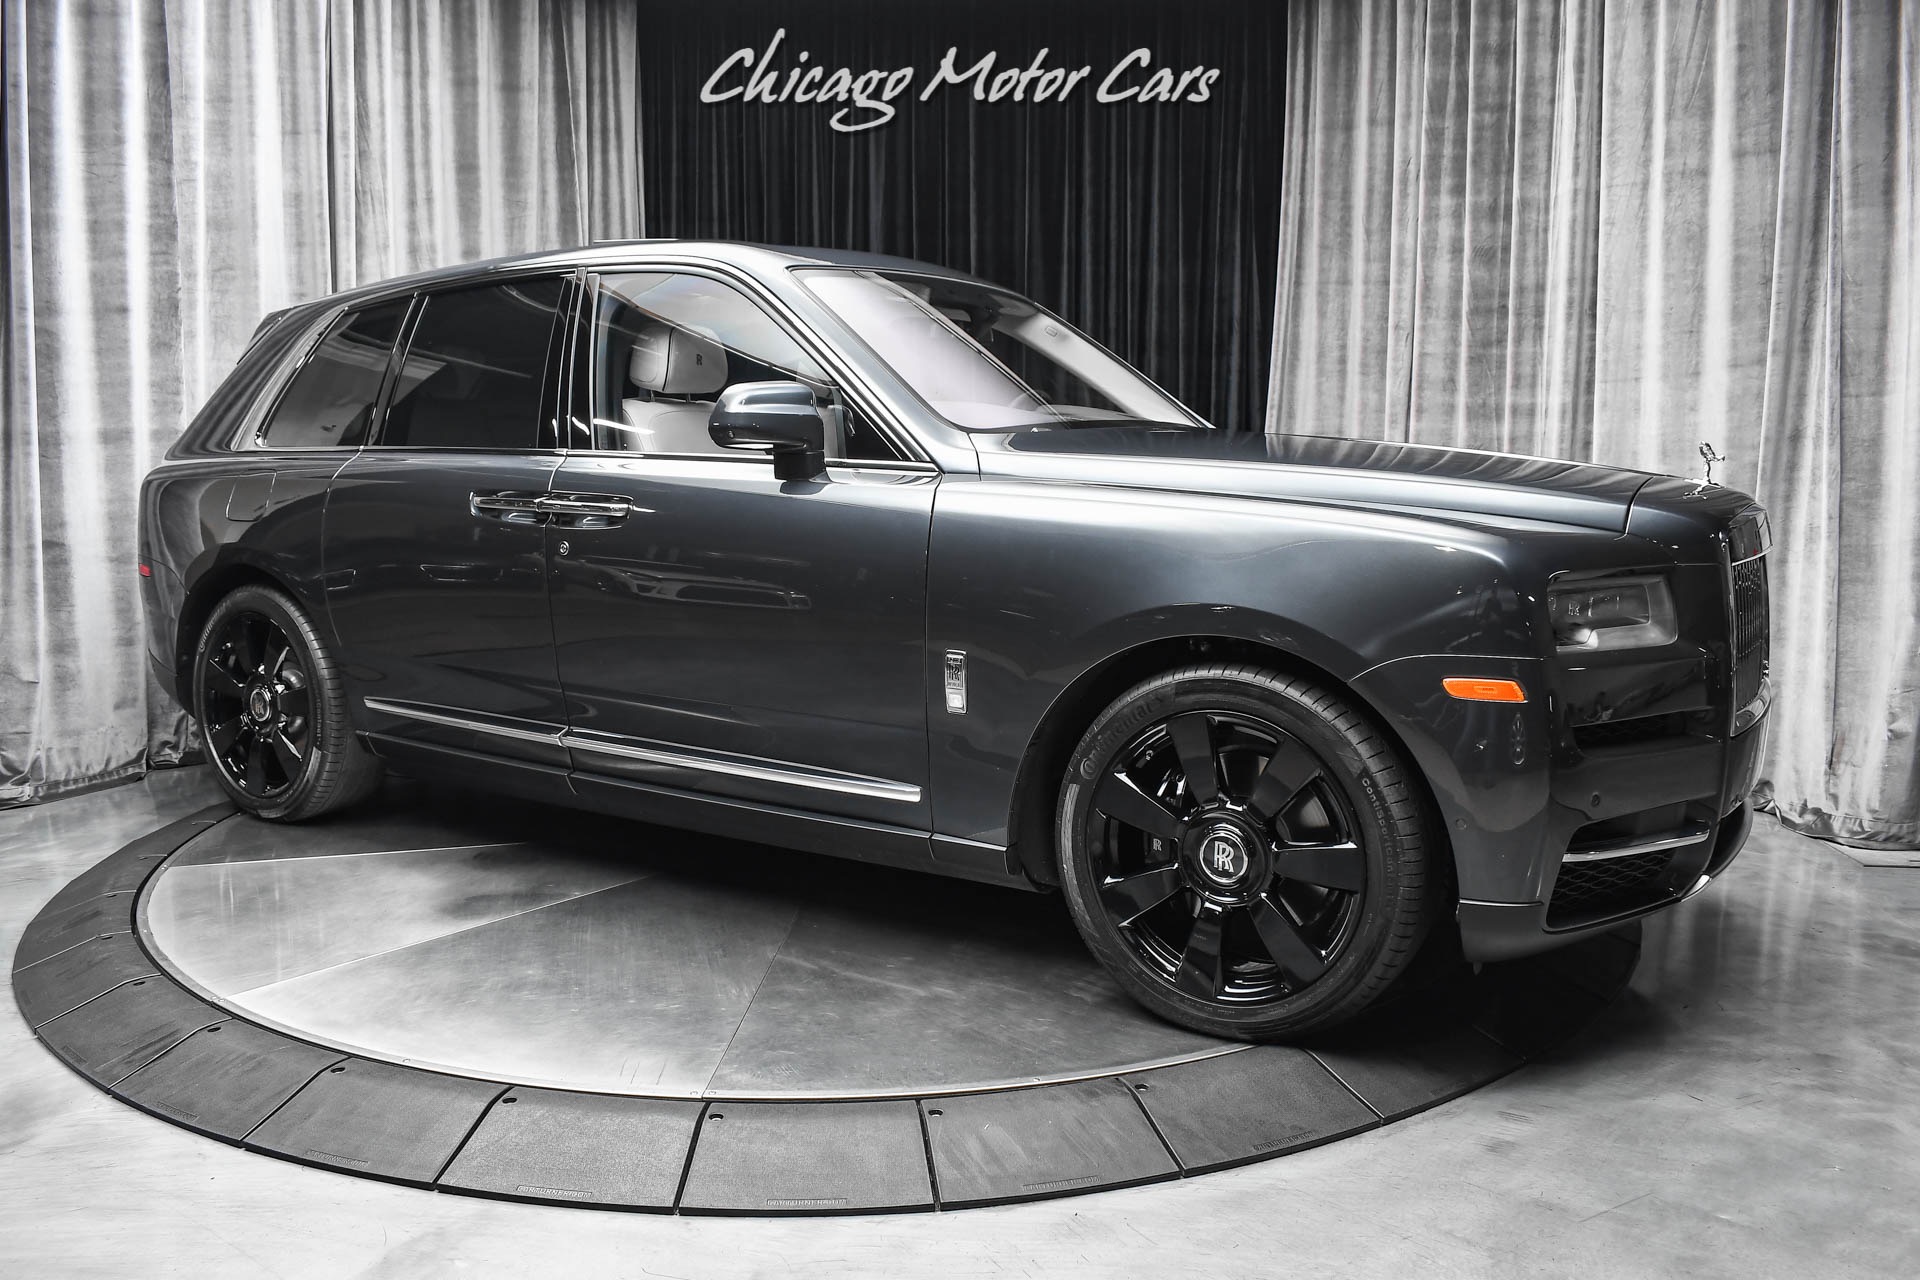 Used-2020-Rolls-Royce-Cullinan-SUV-Only-14k-Miles-LOADED-Module-Edition-Bespoke-Interior-Serviced